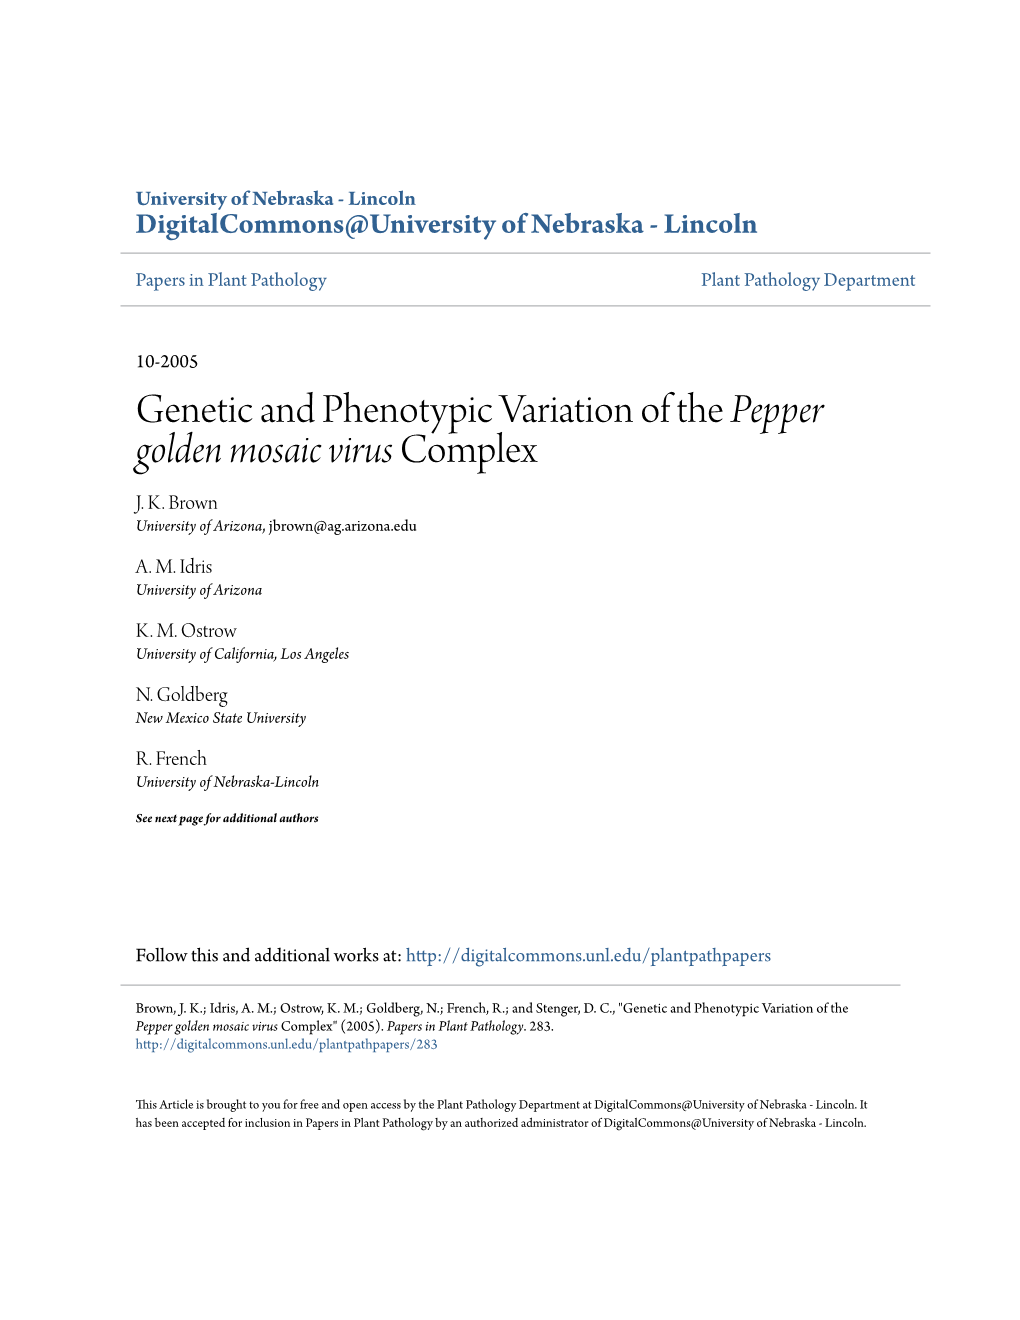 Genetic and Phenotypic Variation of the Pepper Golden Mosaic Virus Complex J